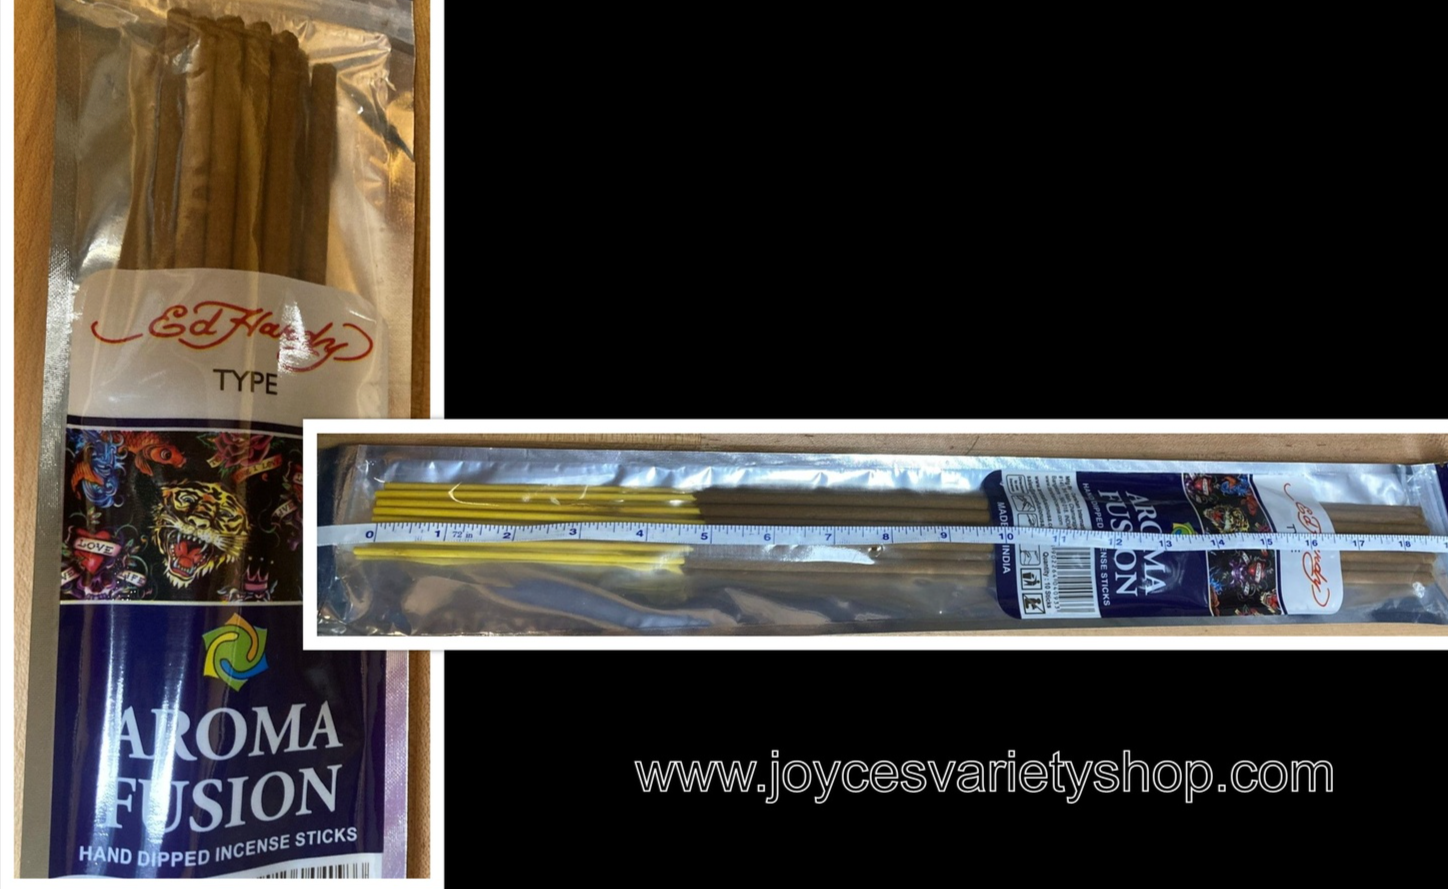 Aroma Fusion Incense 19" Stick Hand Dipped Ed Hardy & Many Types 10-11 Per Pack - $9.99